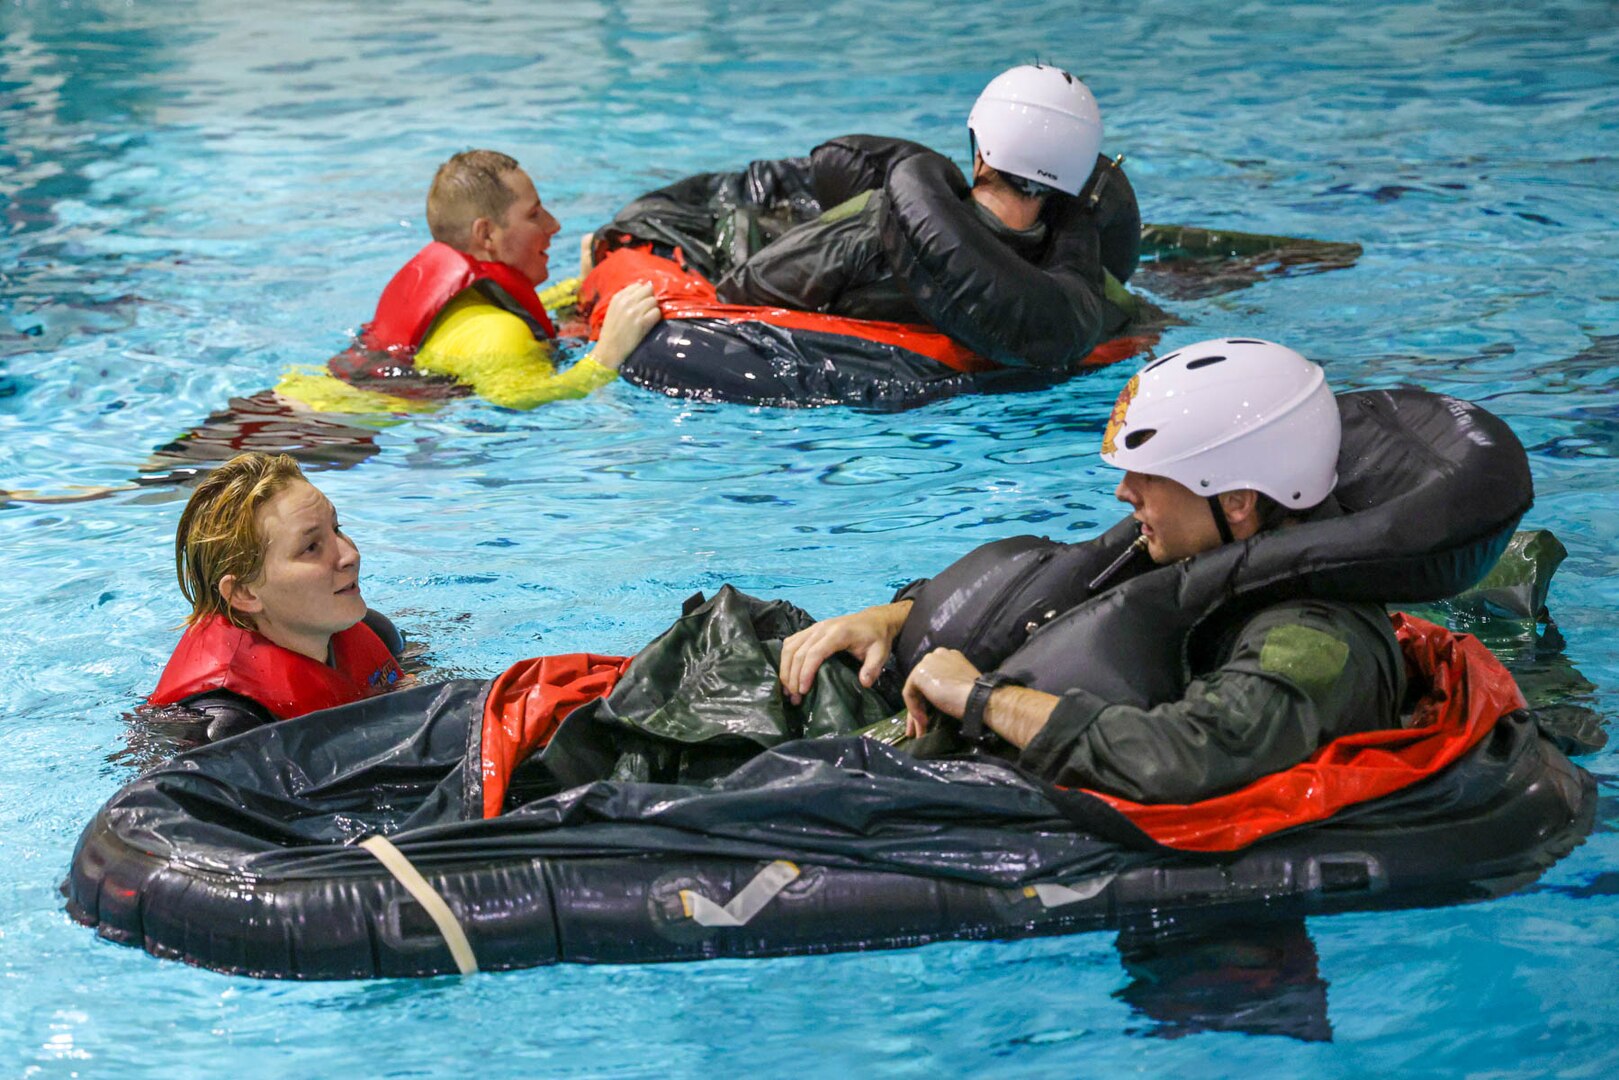 Tech. Sgt. Jasmine Schaffer and Master Sgt. Kenneth Kirchoff, aircrew life support specialists with the 127th Operational Support Squadron, help pilots deploy a life raft during training at Lake Shore High School in Saint Clair Shores, Michigan. Over the October 2023 drill, pilots from the 107th Fighter Squadron, Michigan Air National Guard, practiced water survival tactics during the final phase of their survival, evasion, resistance and escape training refresher course.